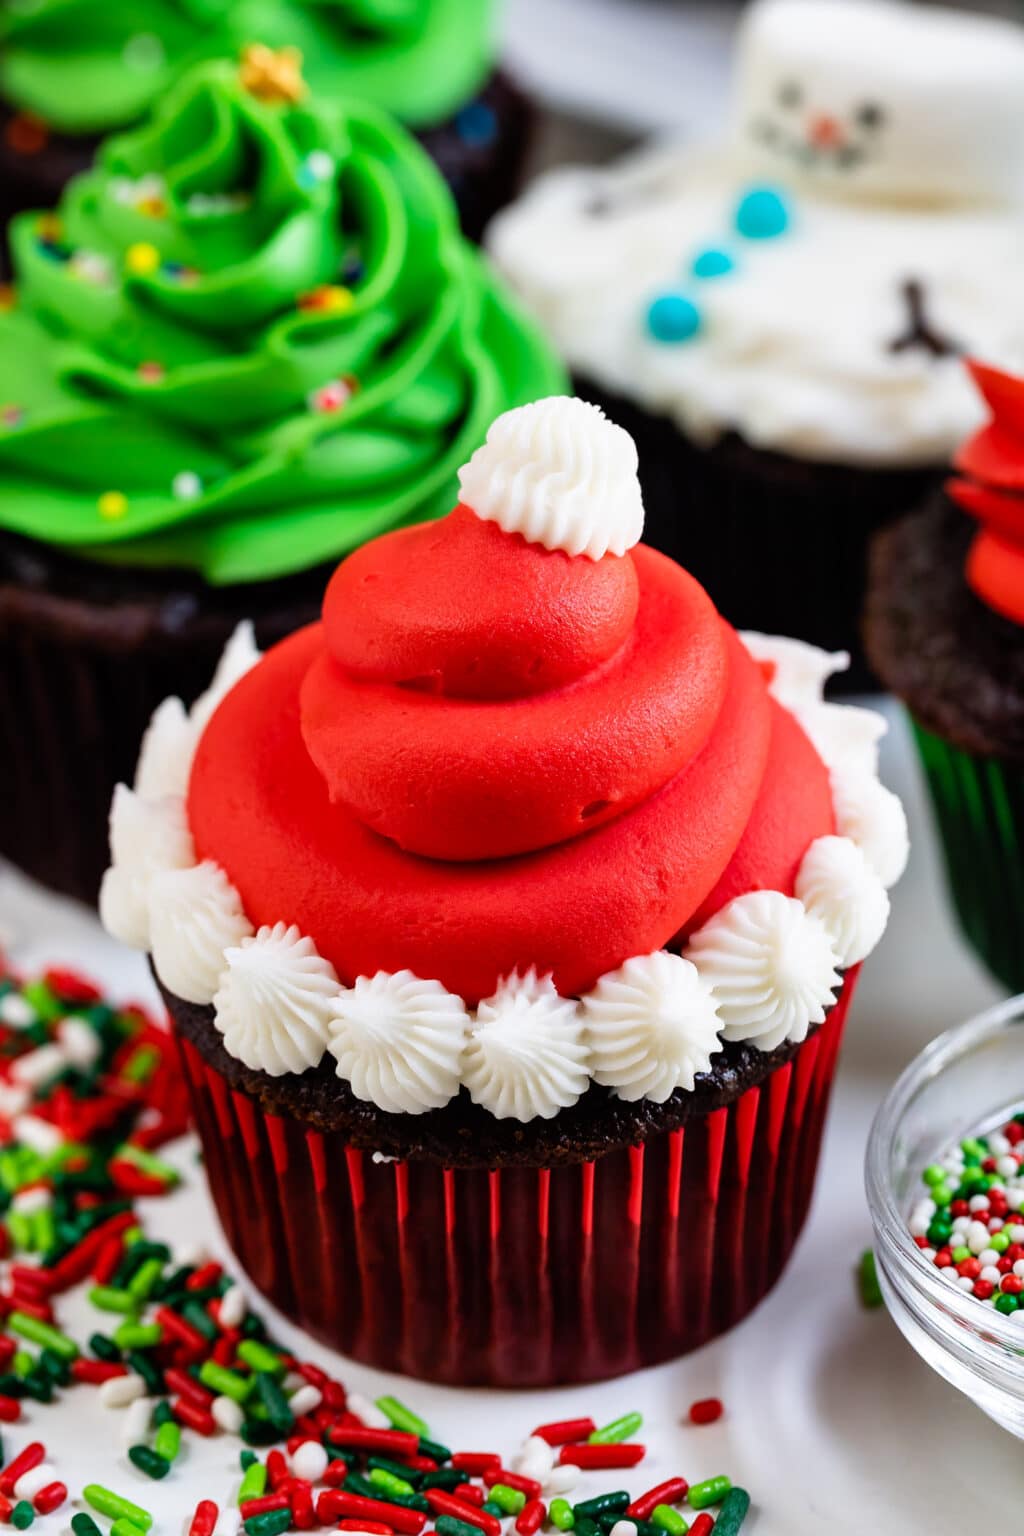 Easy Christmas Cupcakes (4 ways) - Crazy for Crust